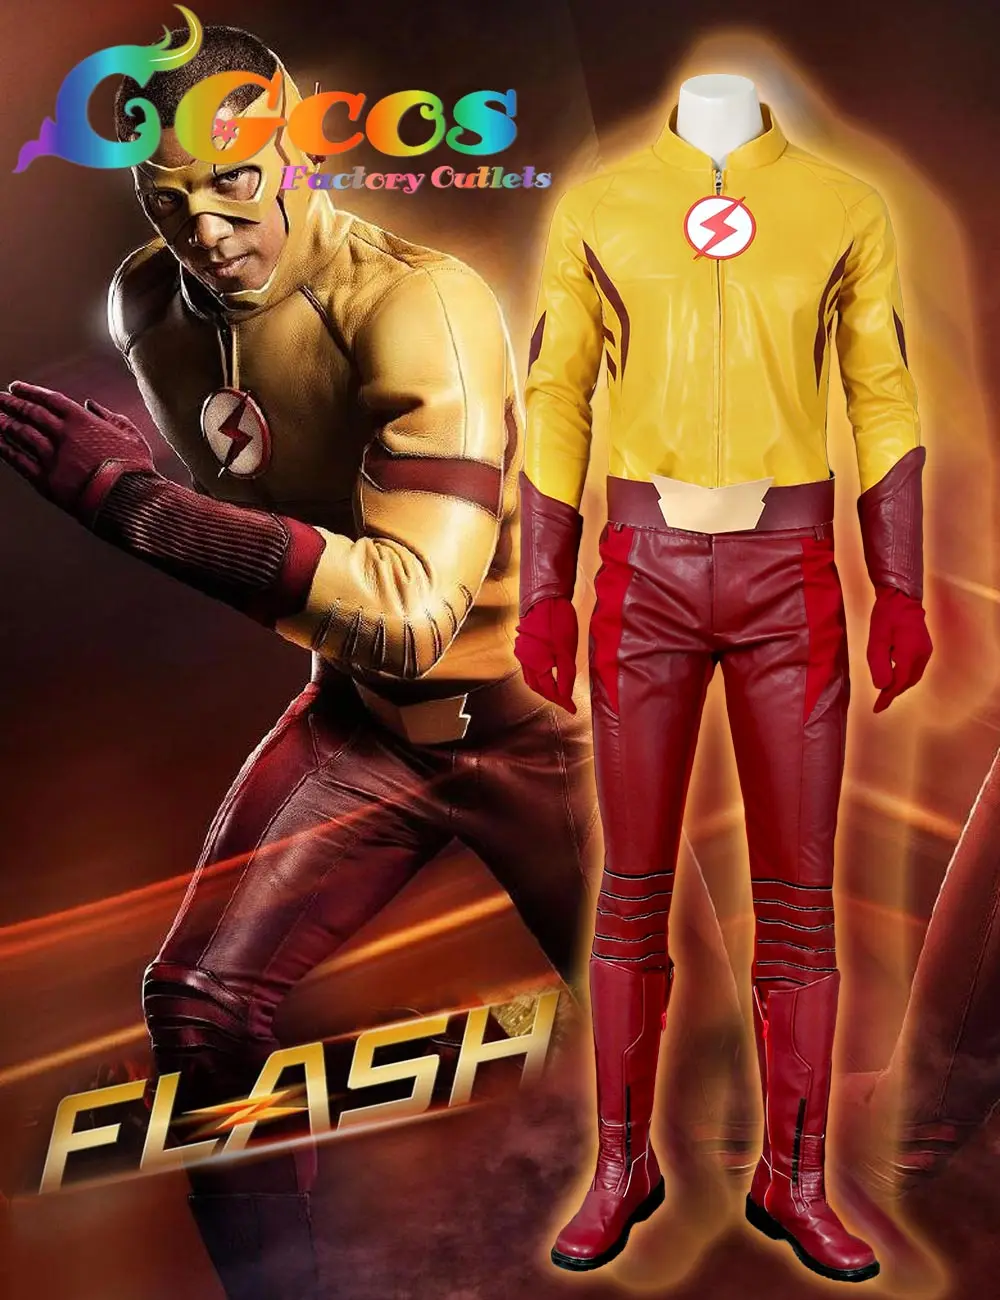 Flash delivery